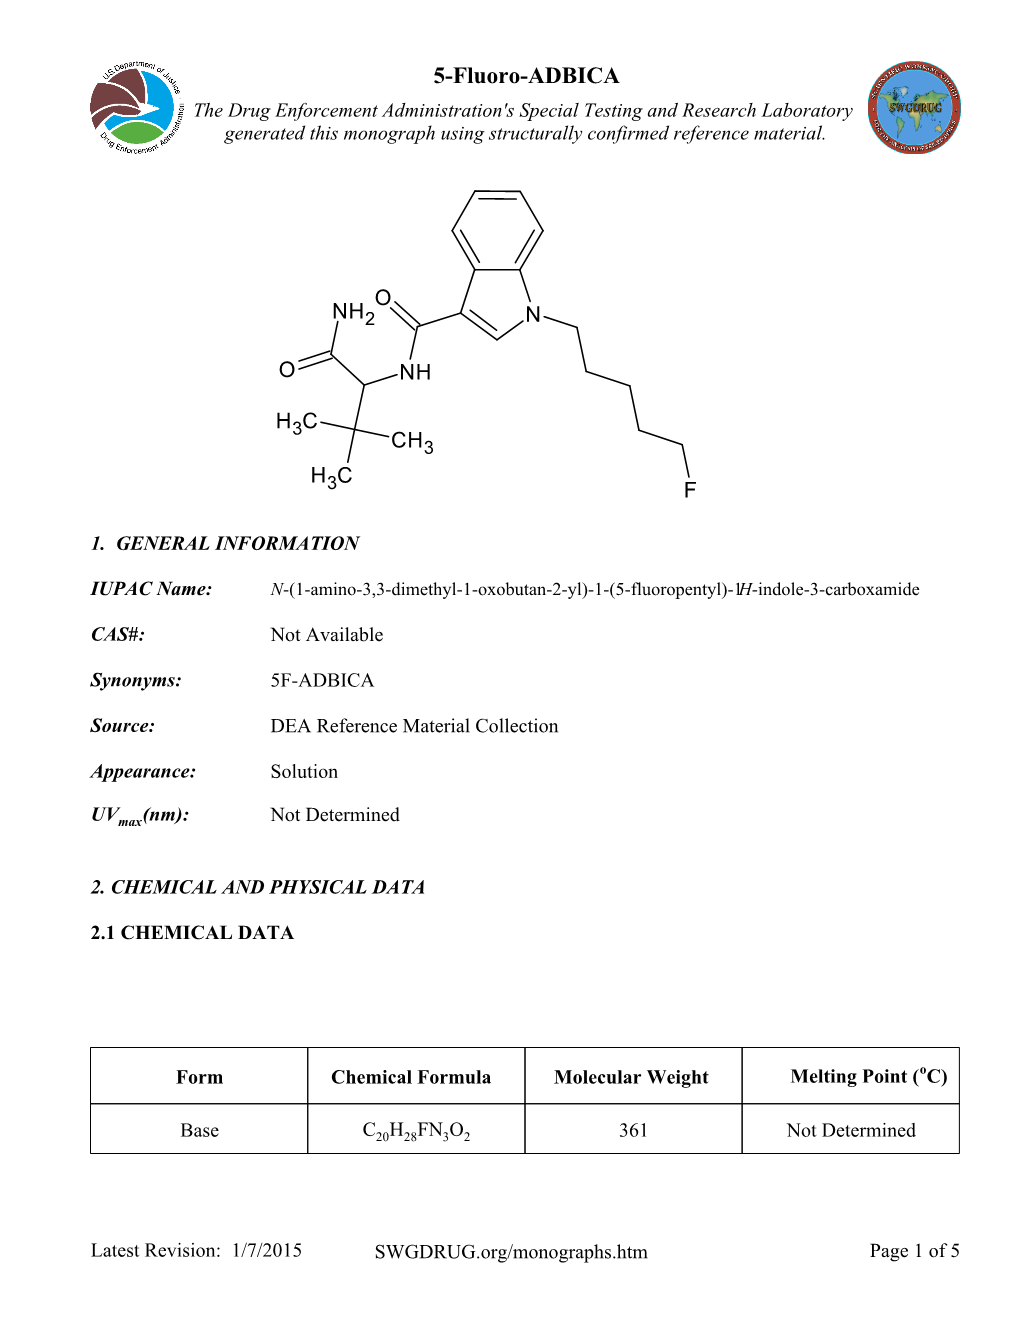 5-Fluoro-ADBICA the Drug Enforcement Administration's Special Testing and Research Laboratory Generated This Monograph Using Structurally Confirmed Reference Material